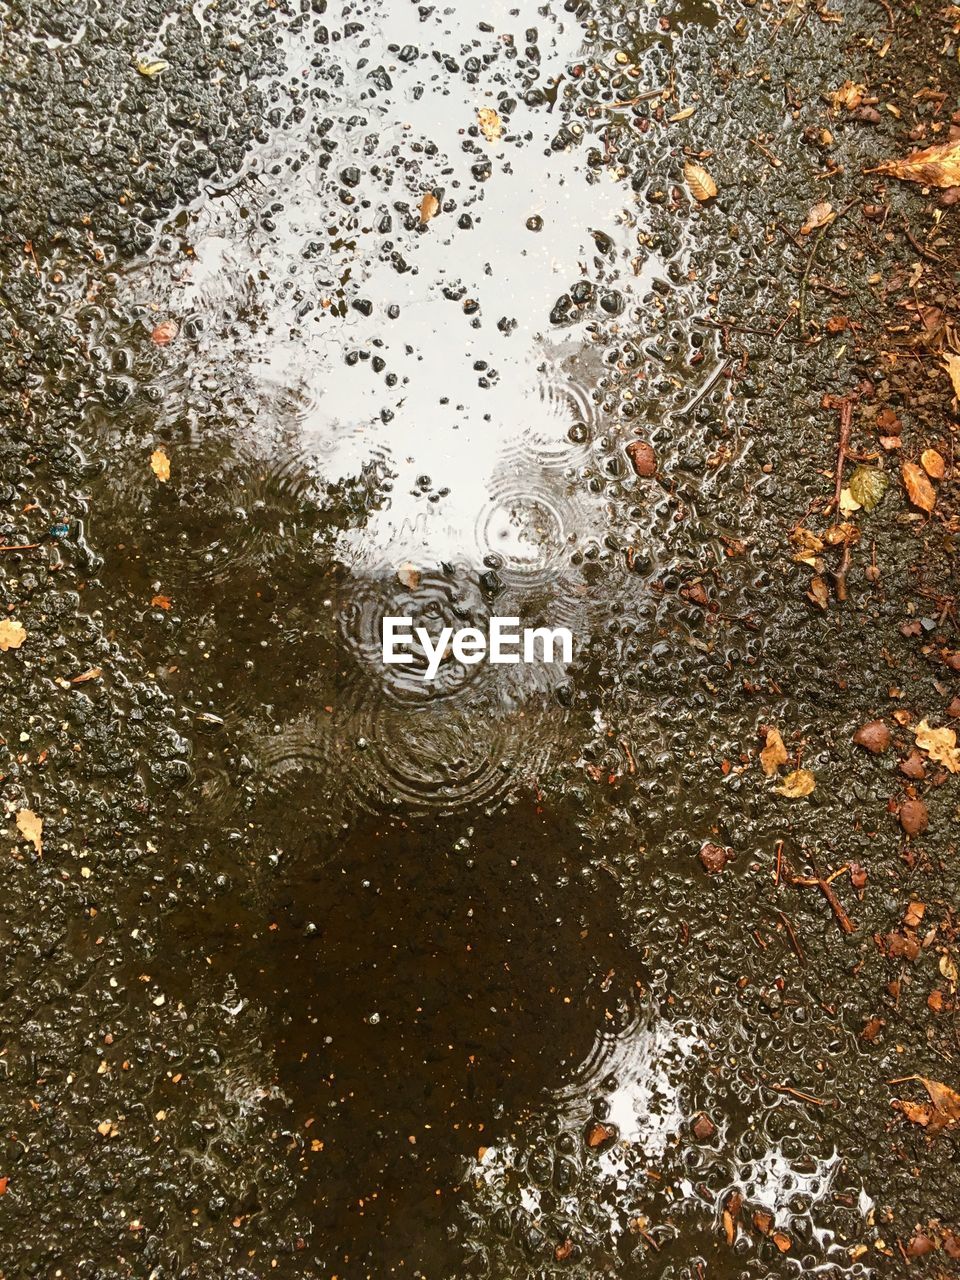 CLOSE-UP OF RAINDROPS ON PUDDLE